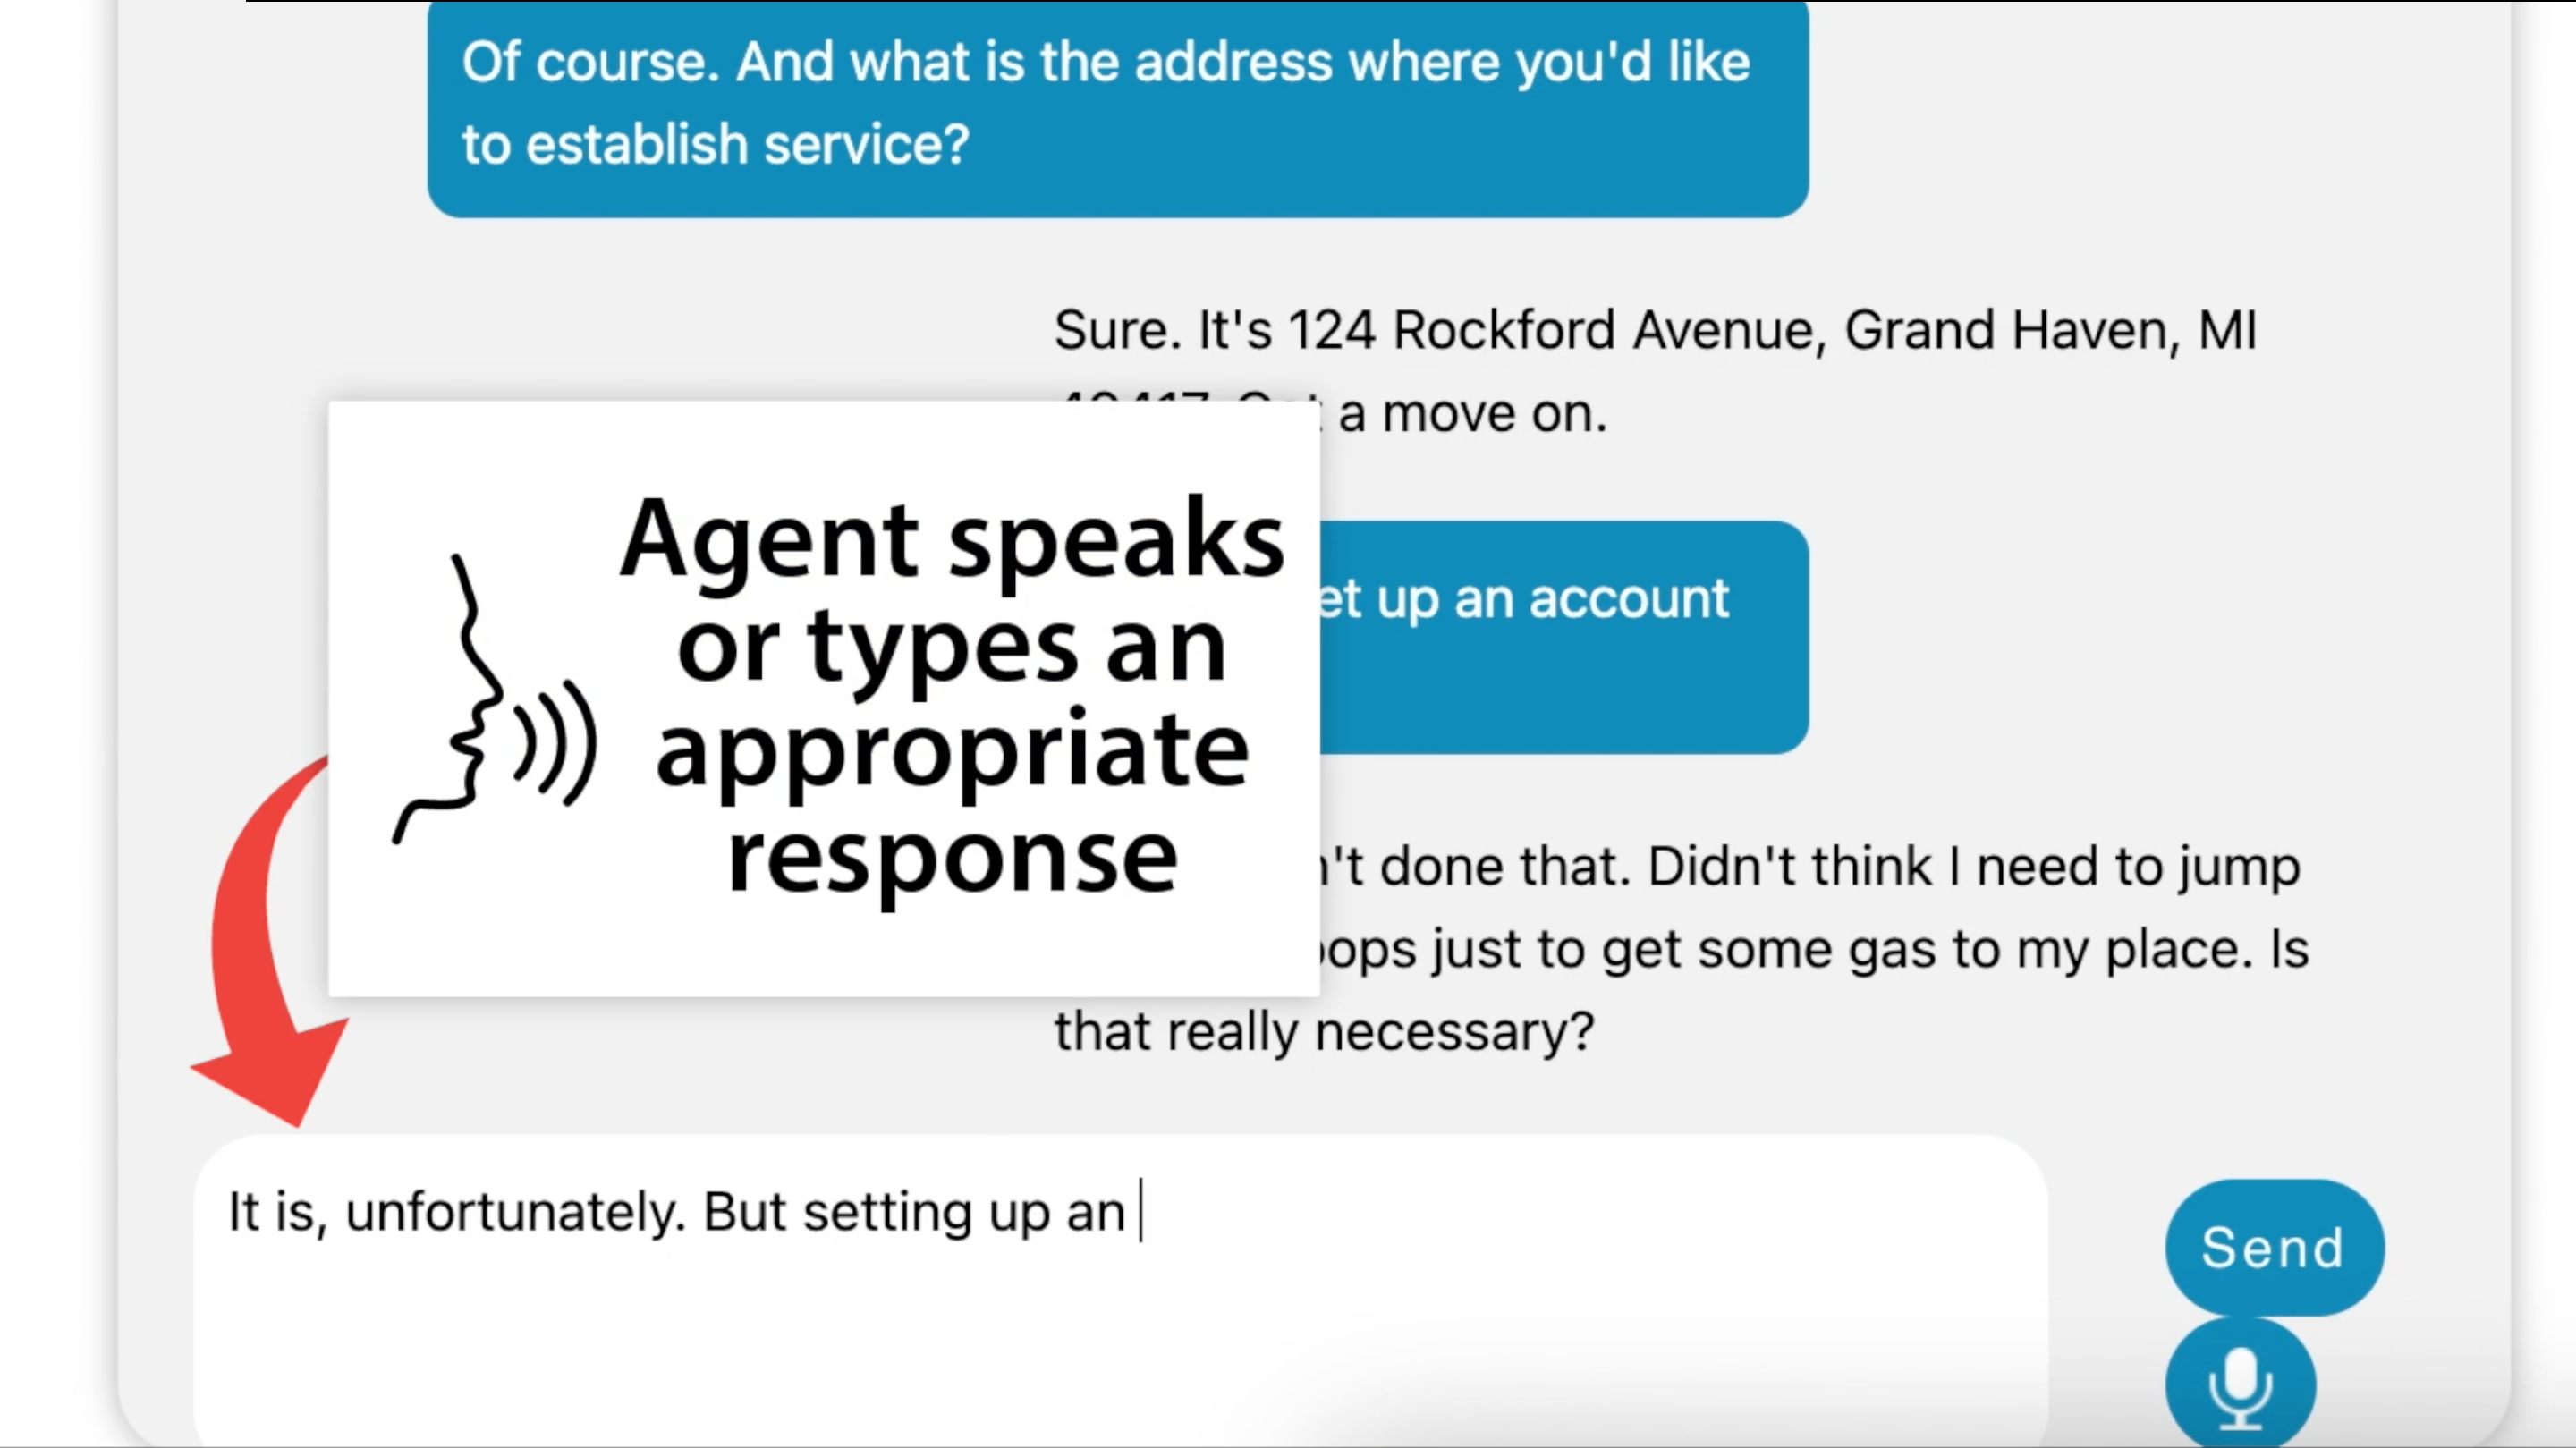 The agent speaks or types a reply.